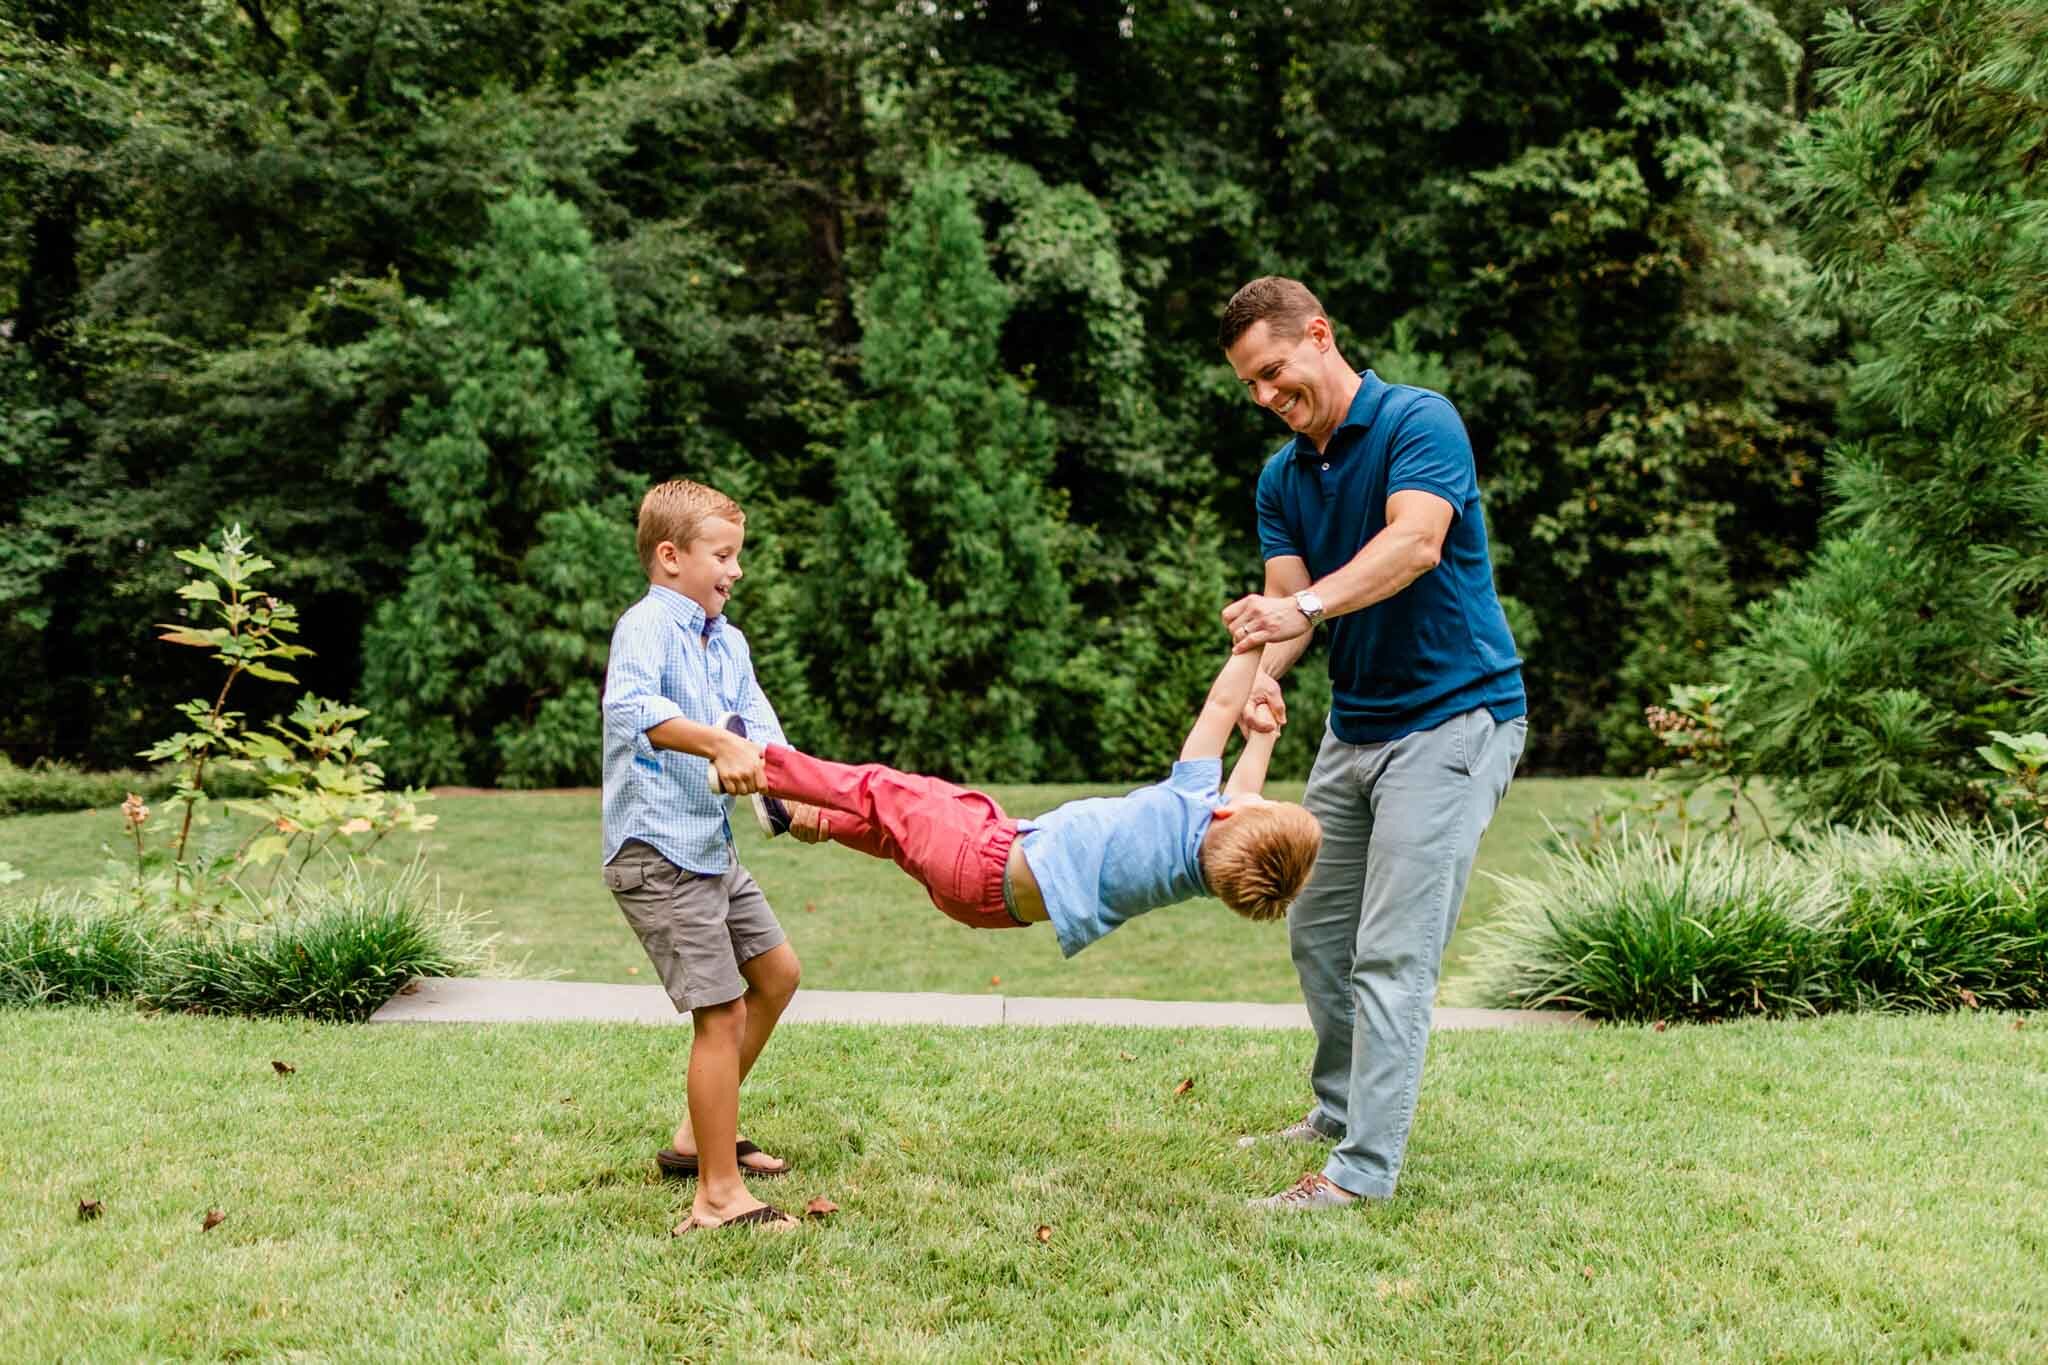 Raleigh Family Photographer | By G. Lin Photography | Dad with two boys playing outside